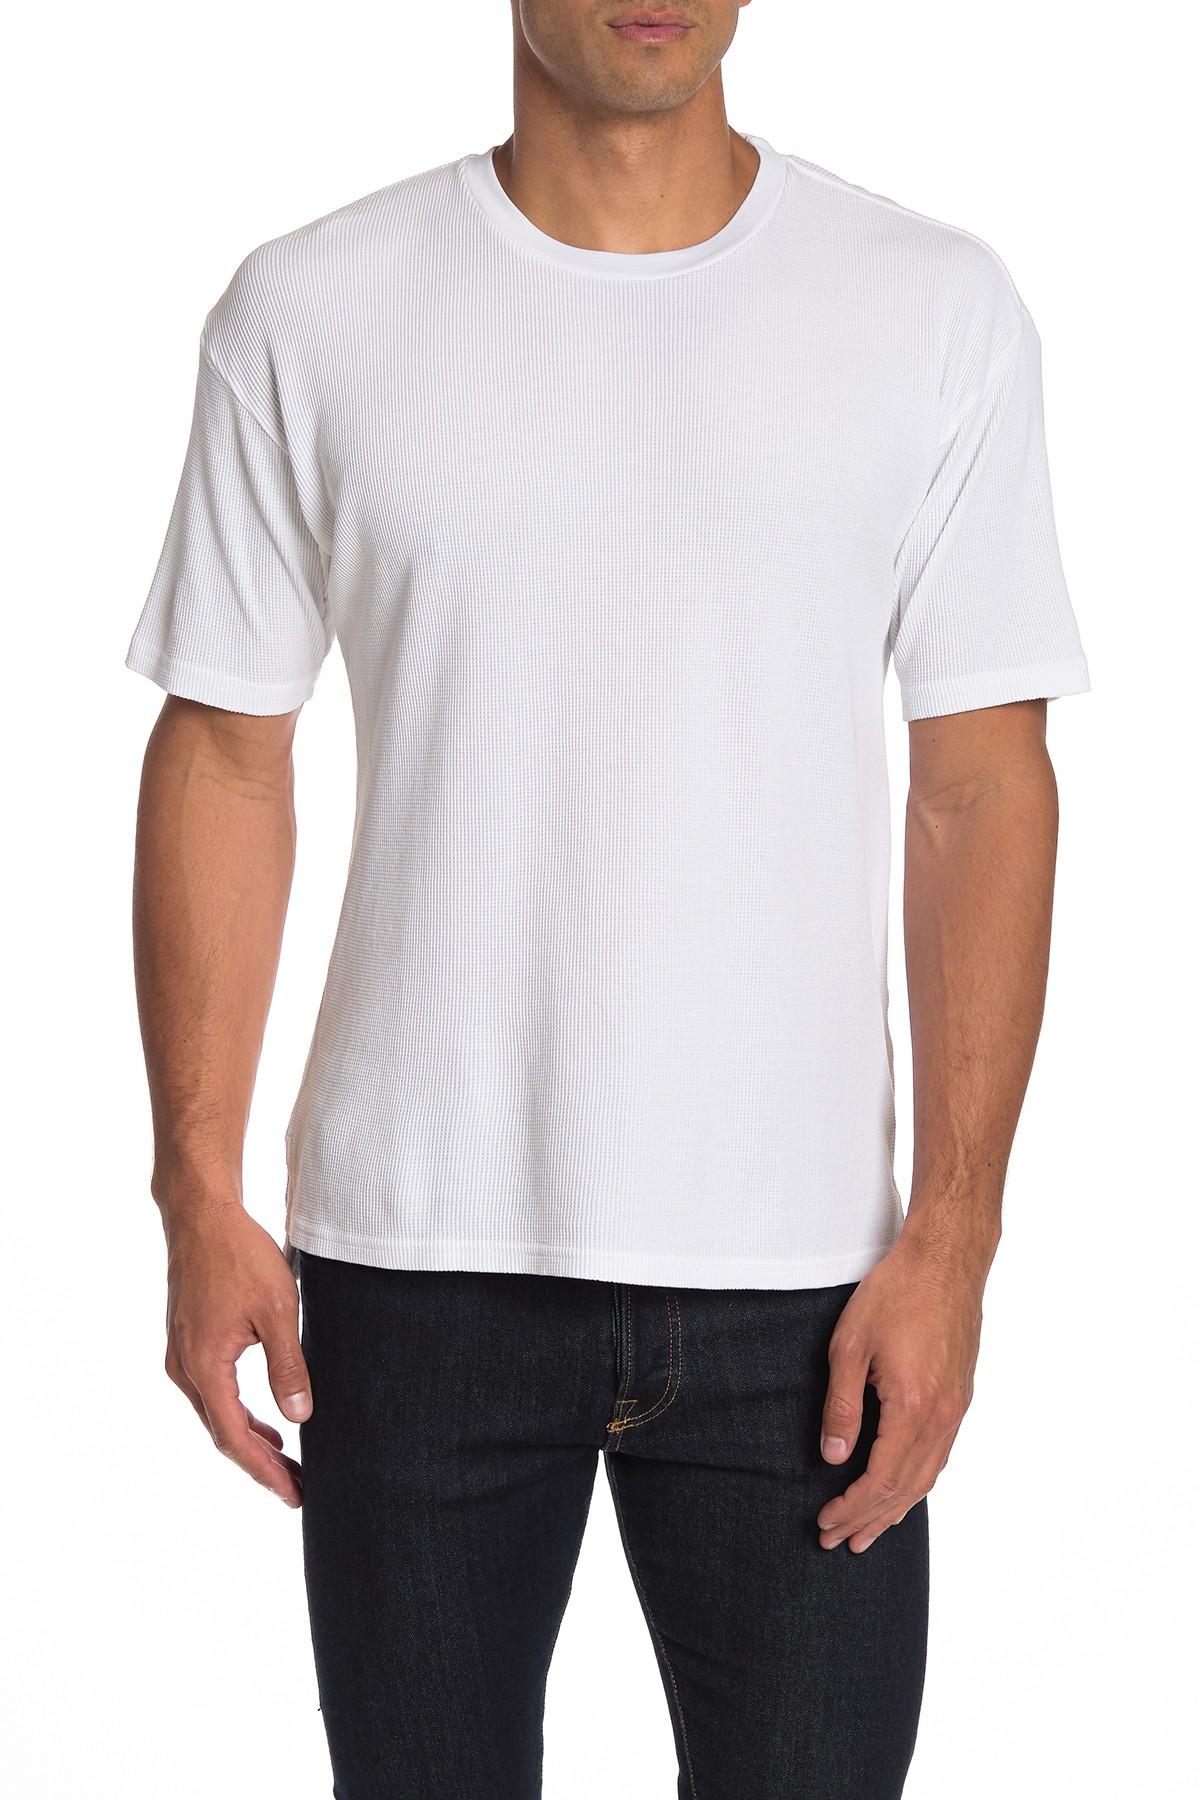 Goodlife Short Sleeve Waffle Knit Crew Neck T-shirt in White for Men - Lyst